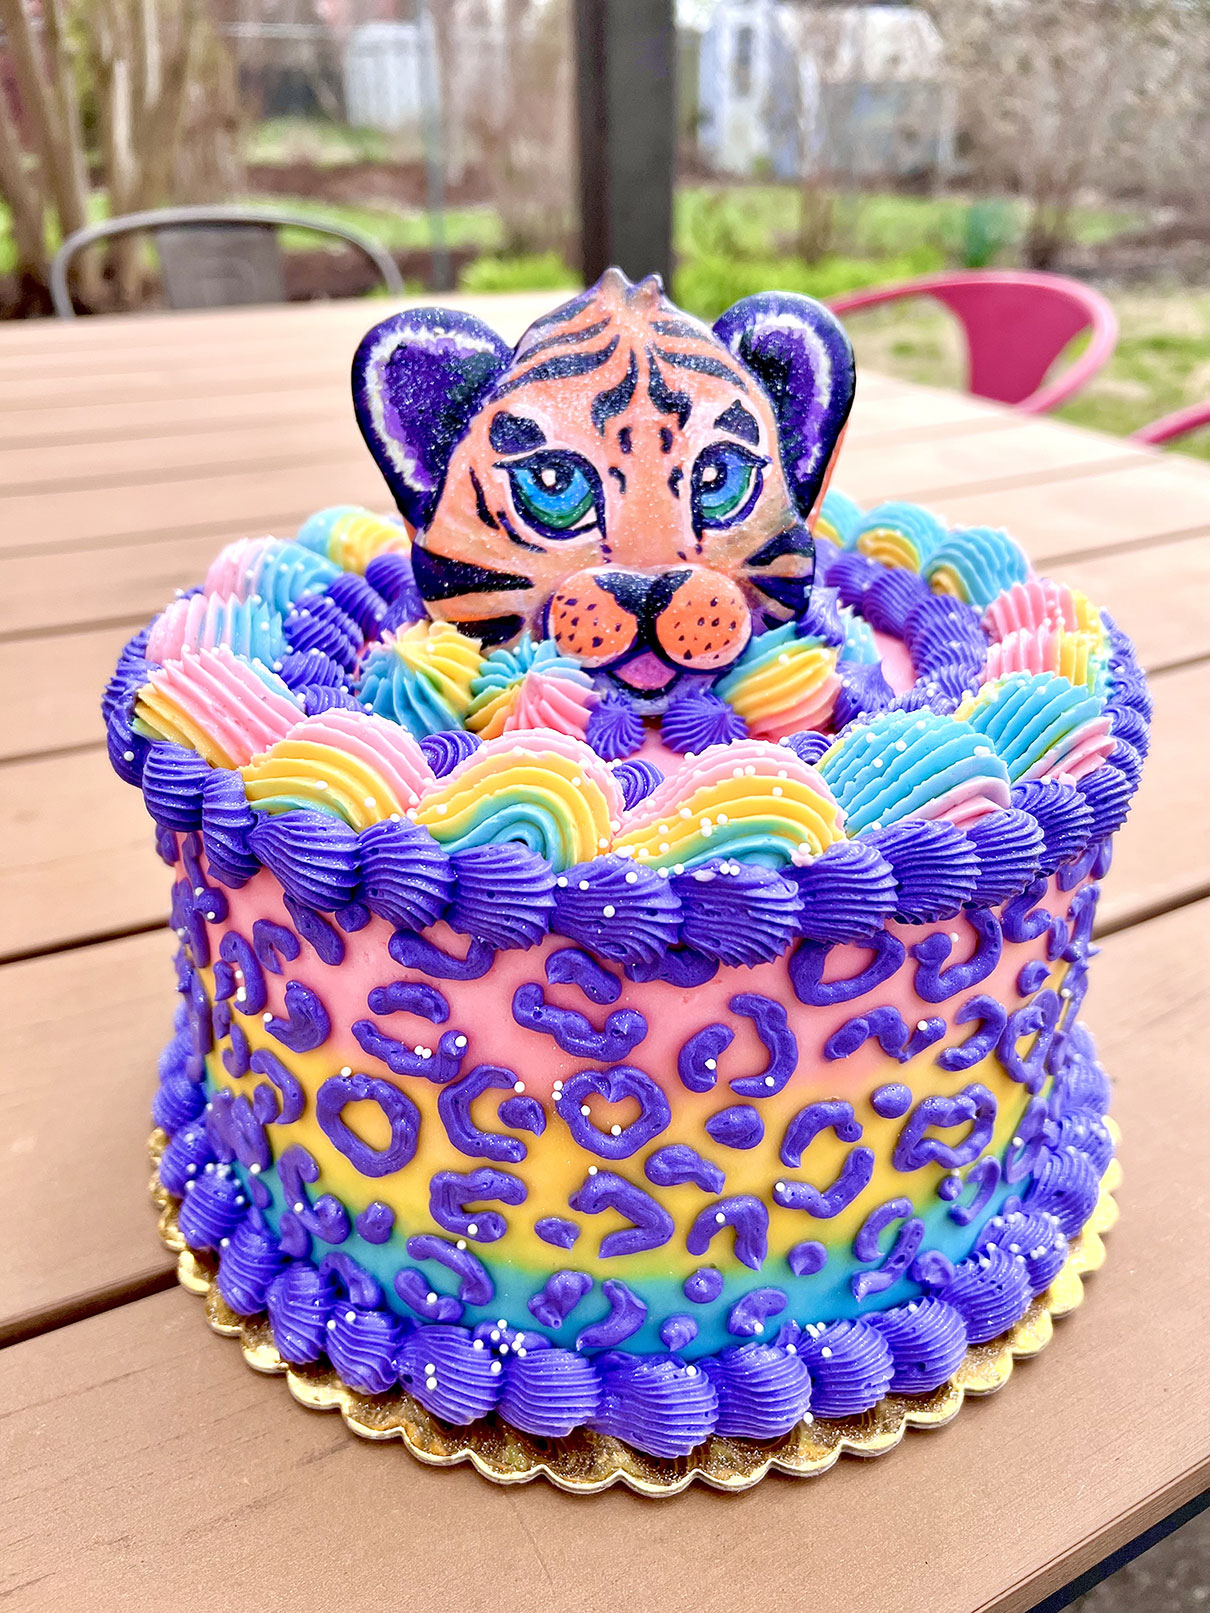 Tiger Cake for a Roaring Birthday Party